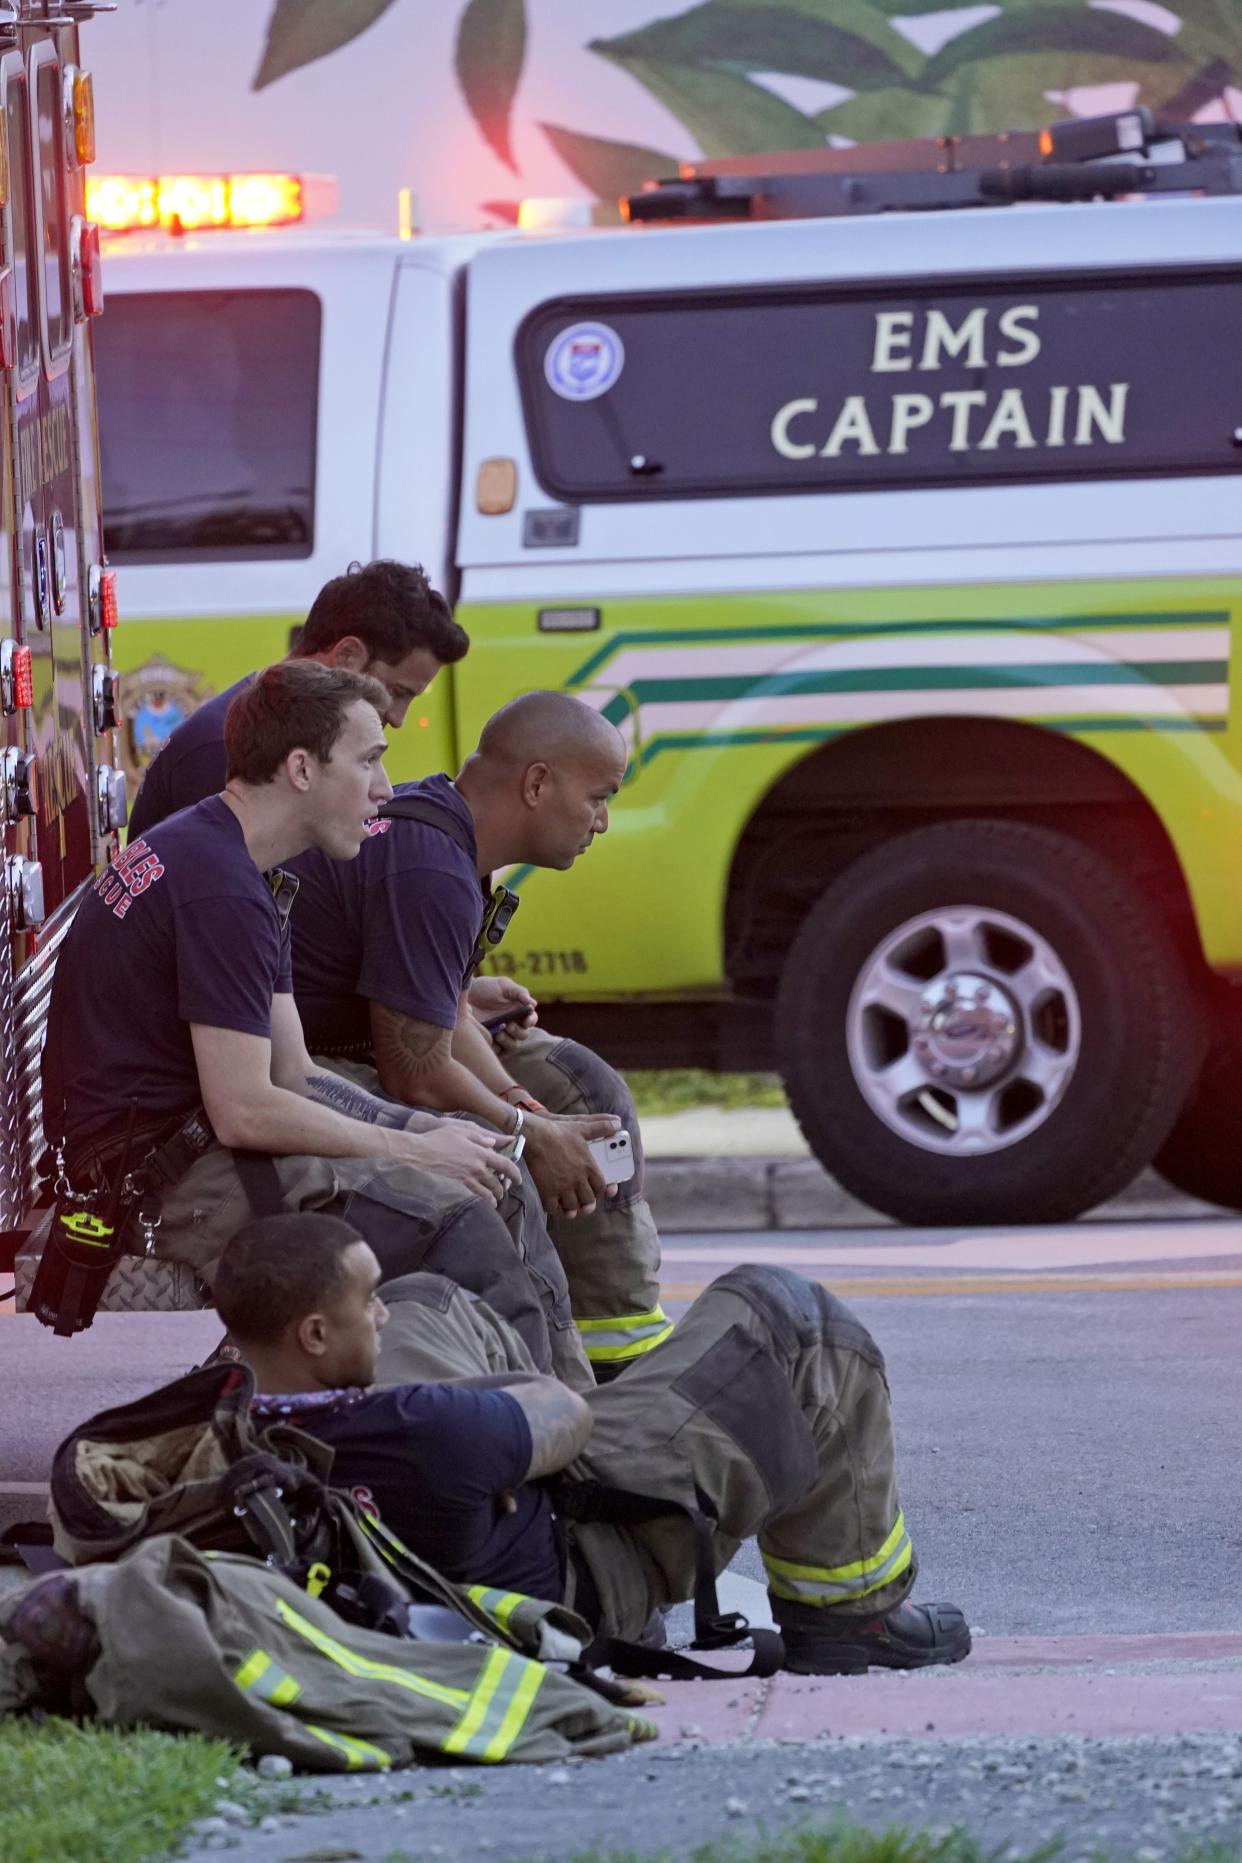 Firefighters wait near the site of a partial building collapse, Thursday, June 24, 2021, in Surfside, Fla.